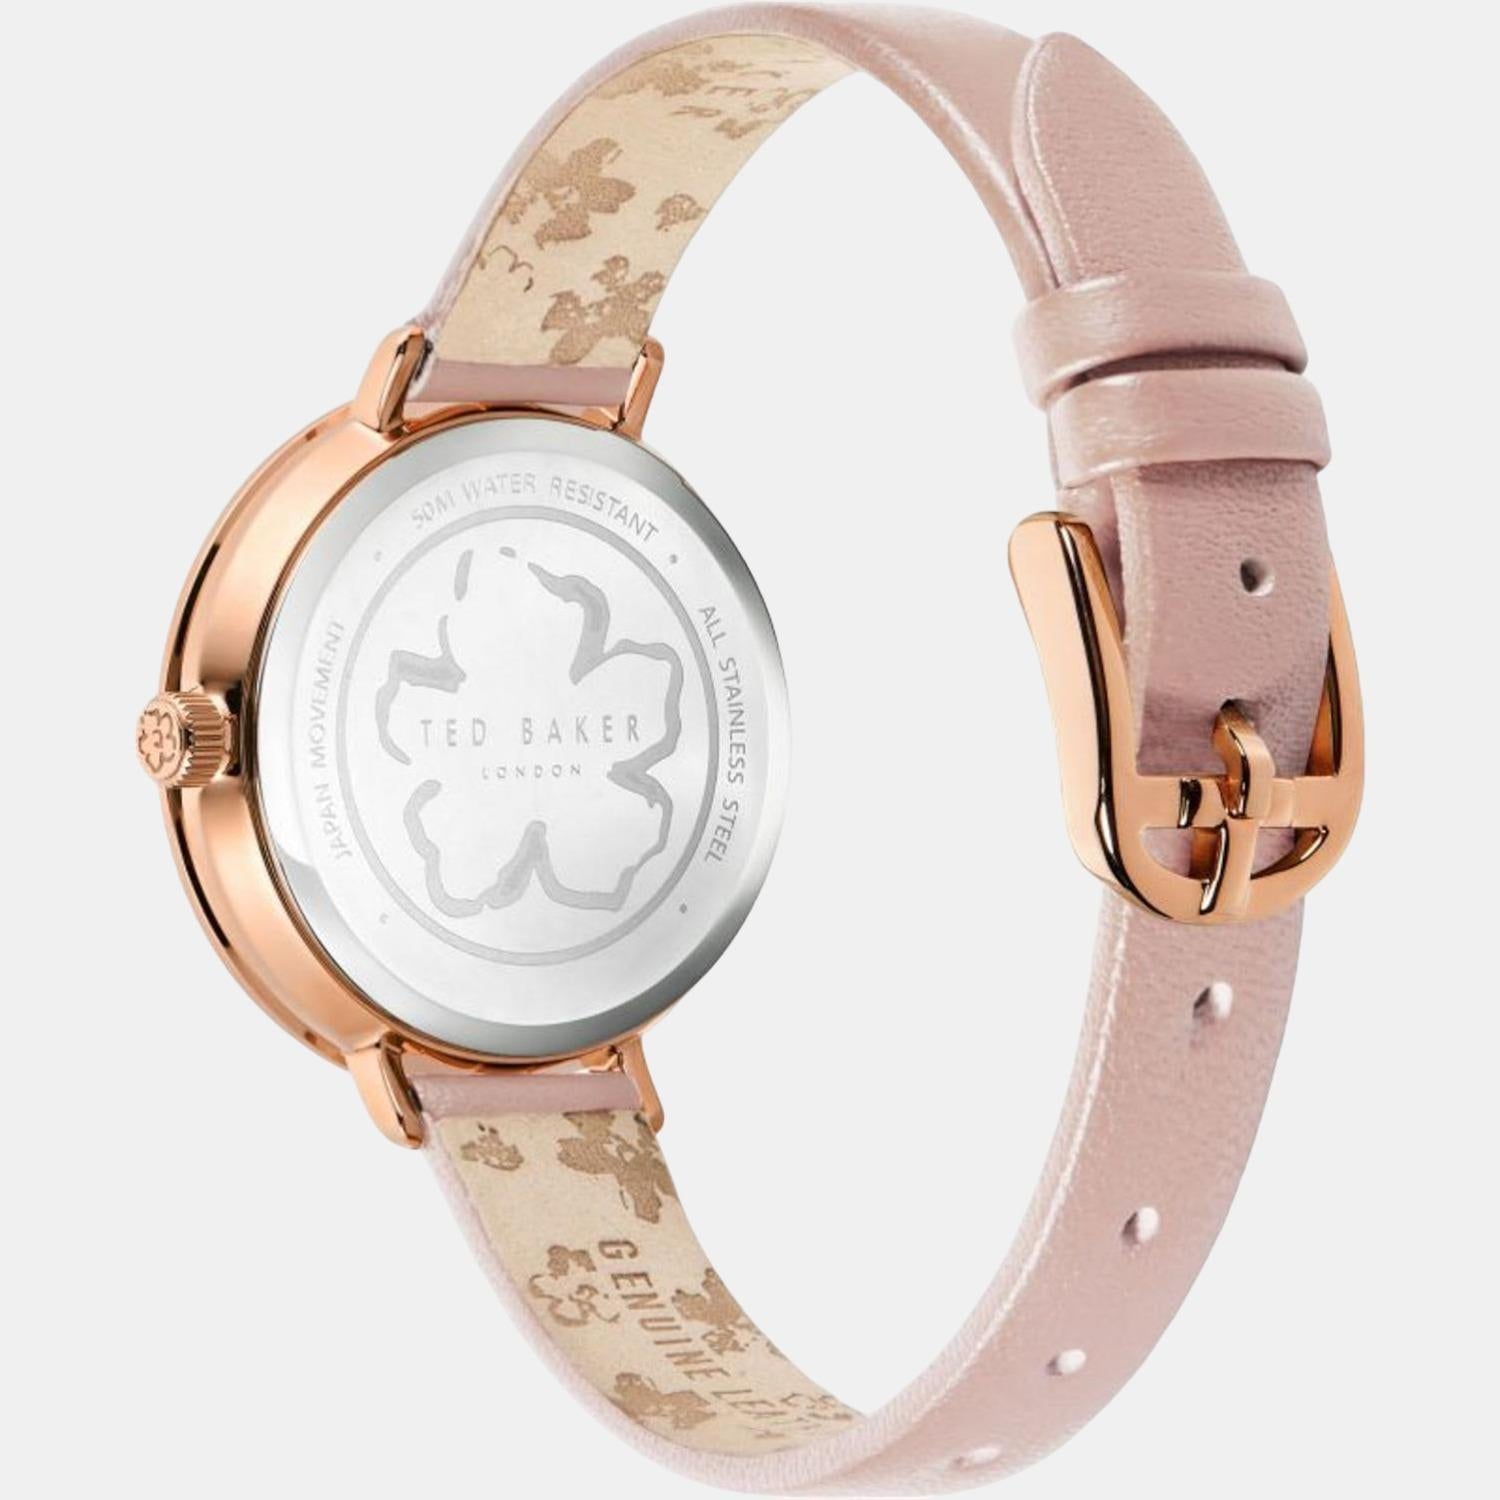 ted-baker-stainless-steel-white-anlaog-women-watch-bkpamf204